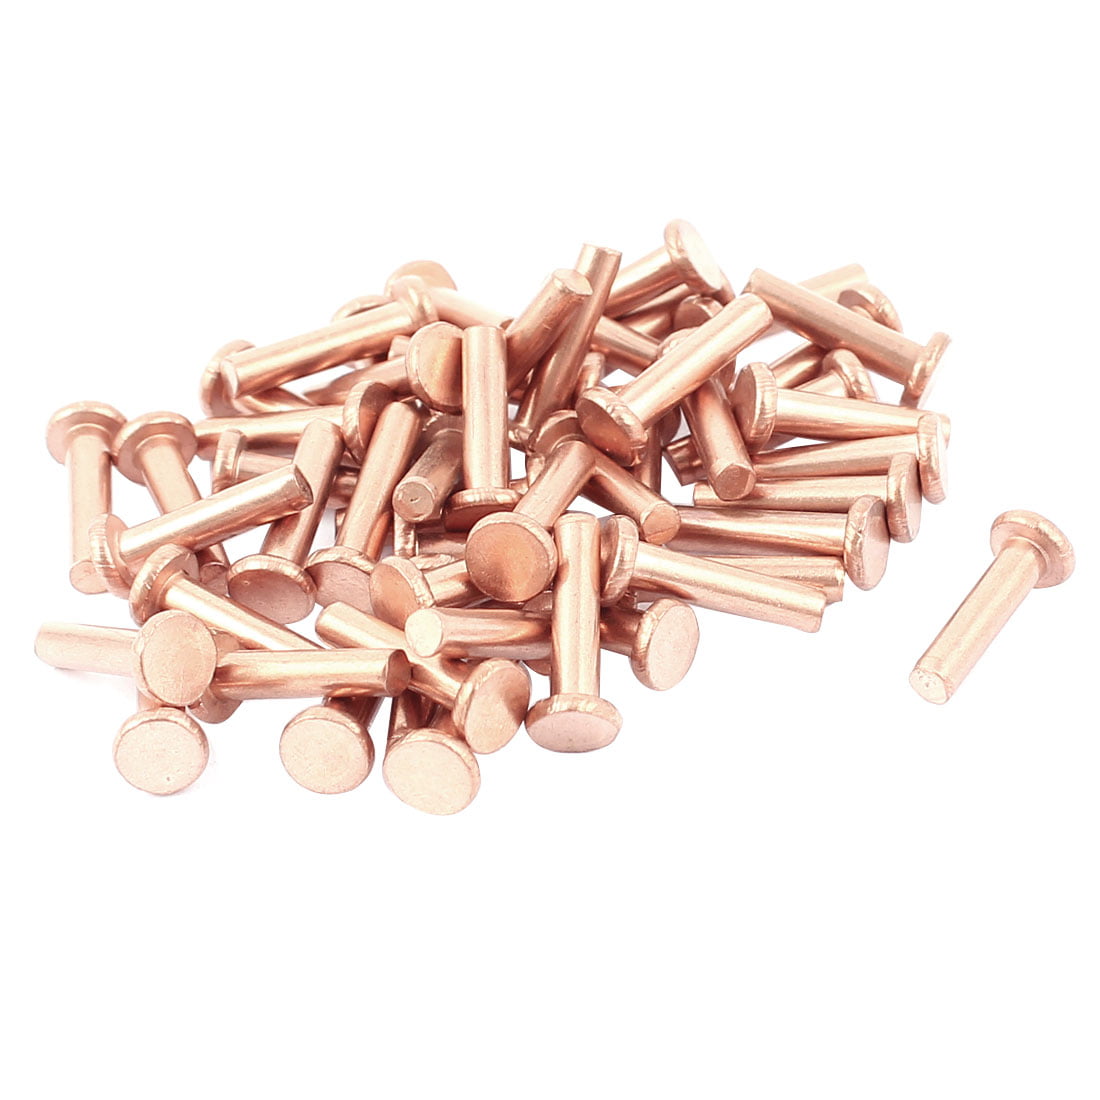 1/8" dia copper rivets 3/8" Long pack of 50 Round/snap Head 